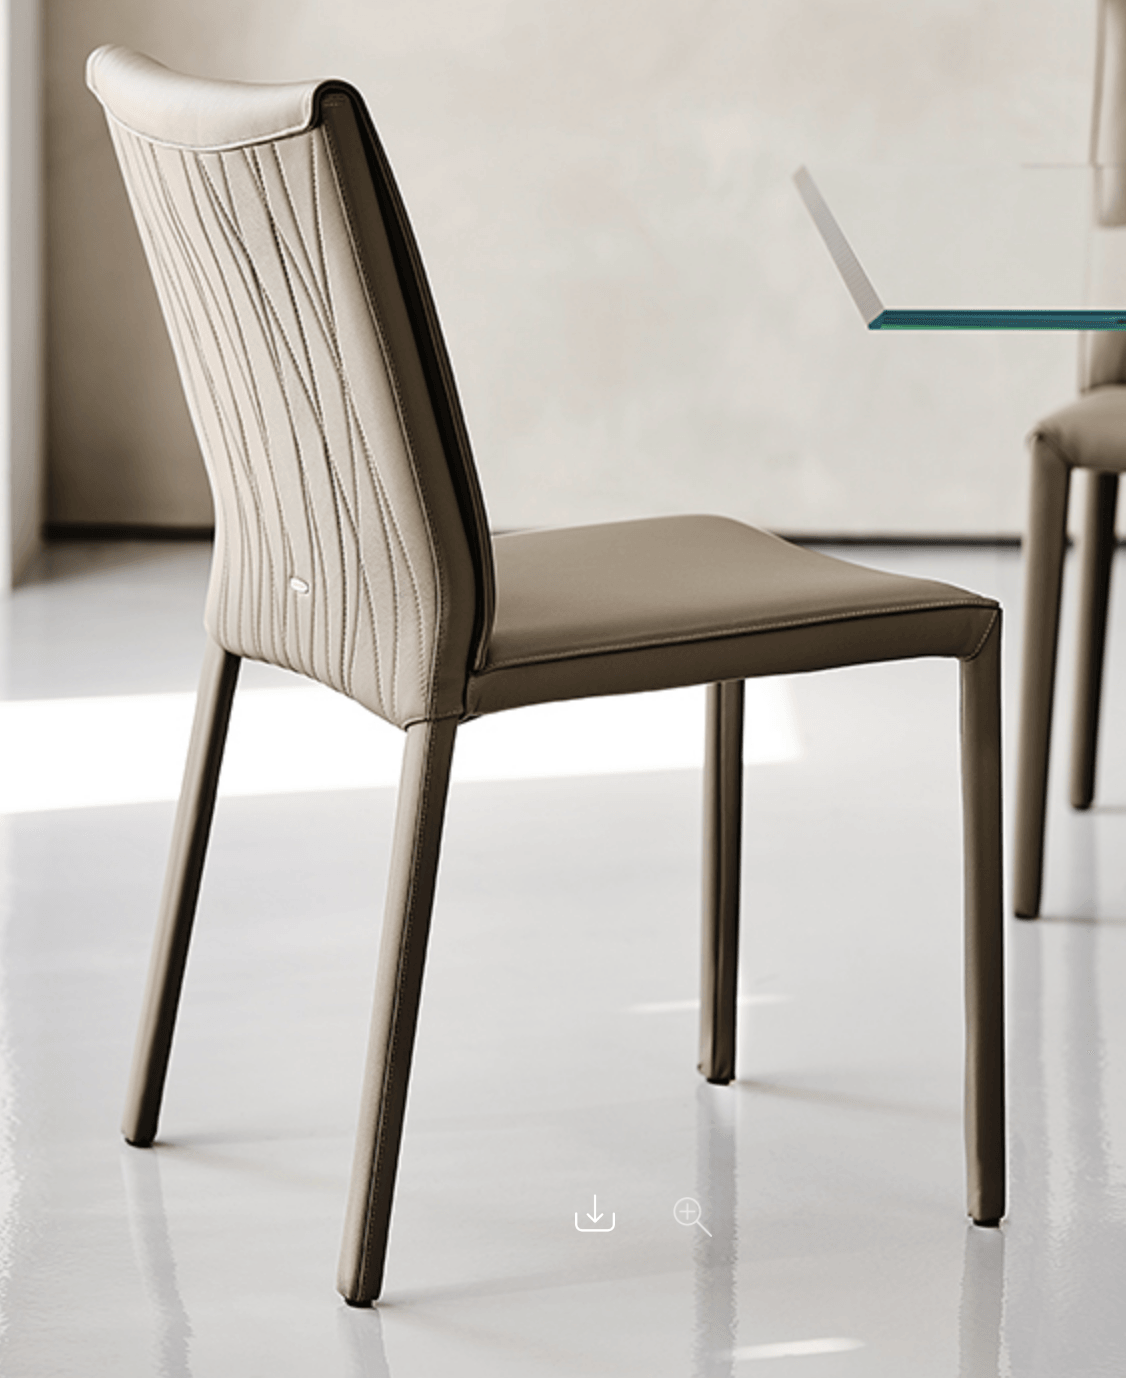 Couture dining chair - Euro Living Furniture